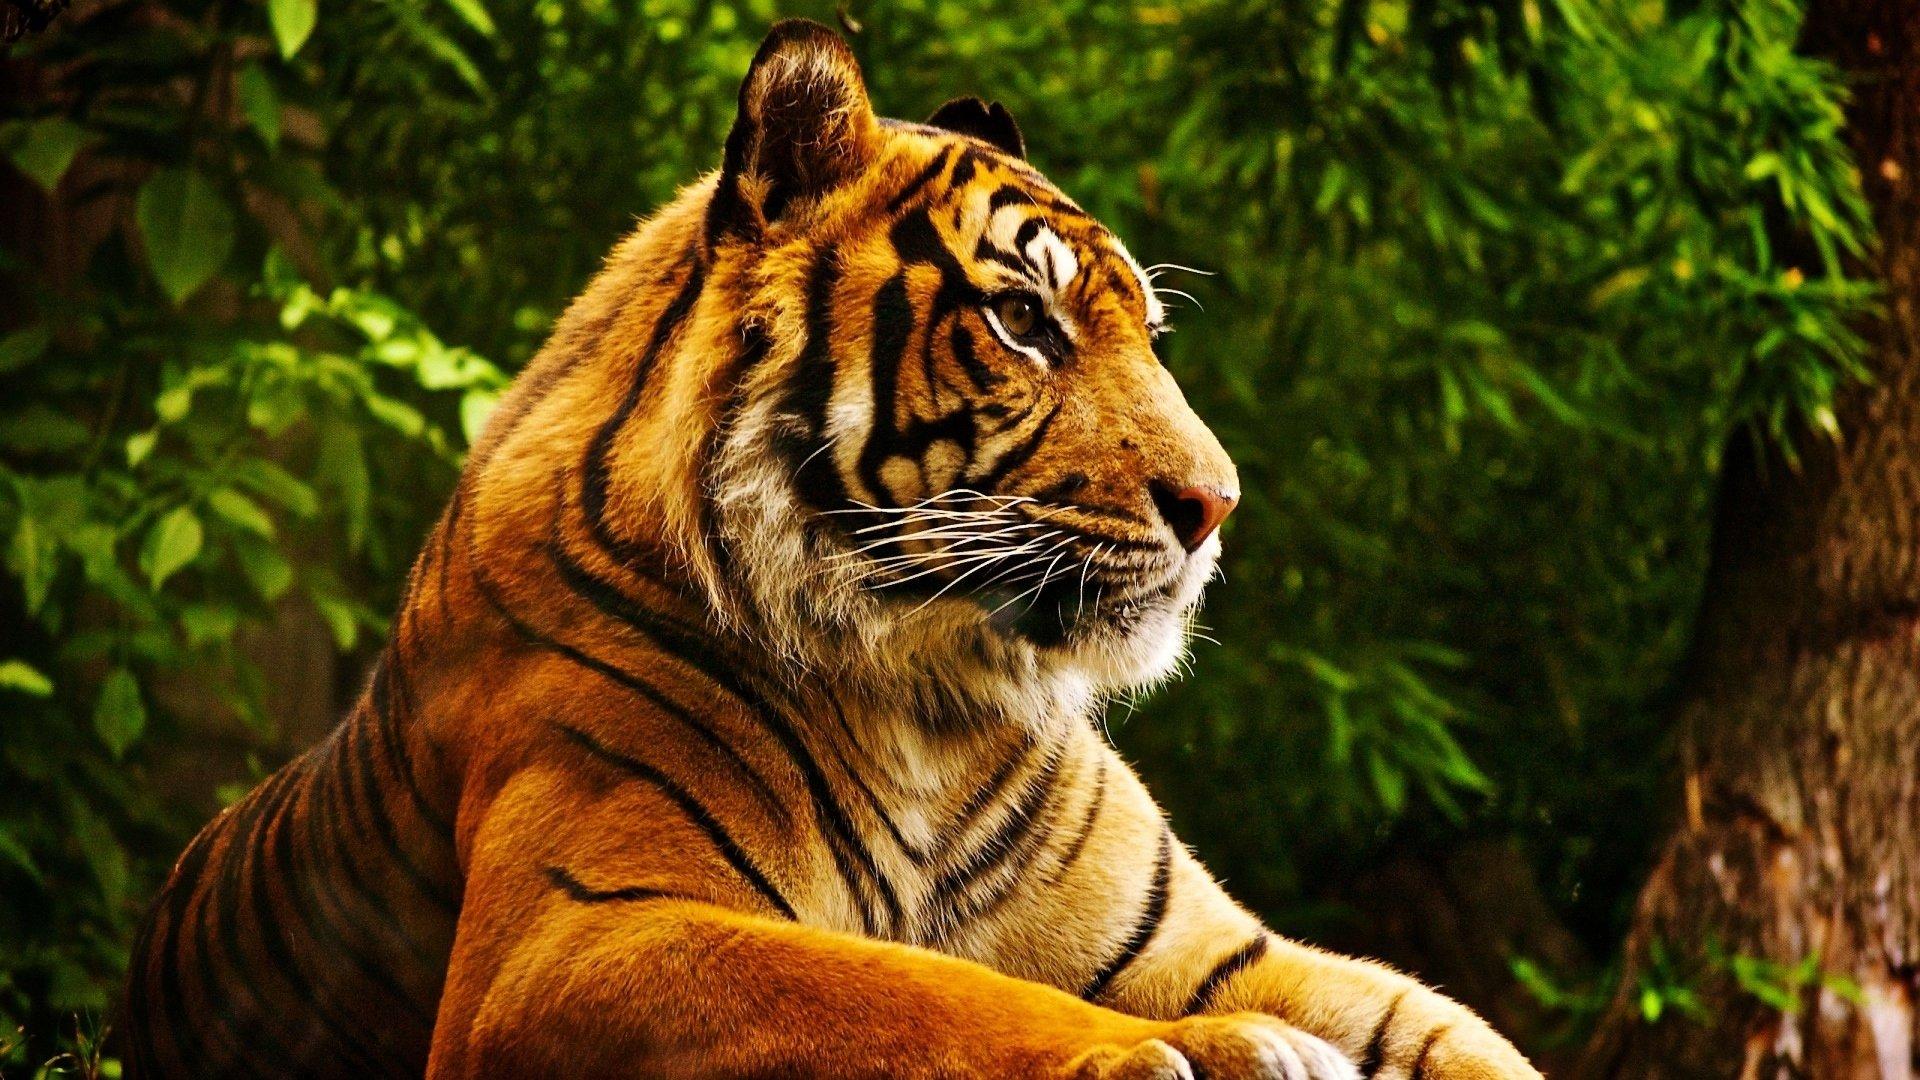 Animated Tiger Wallpaper Hd For Mobile